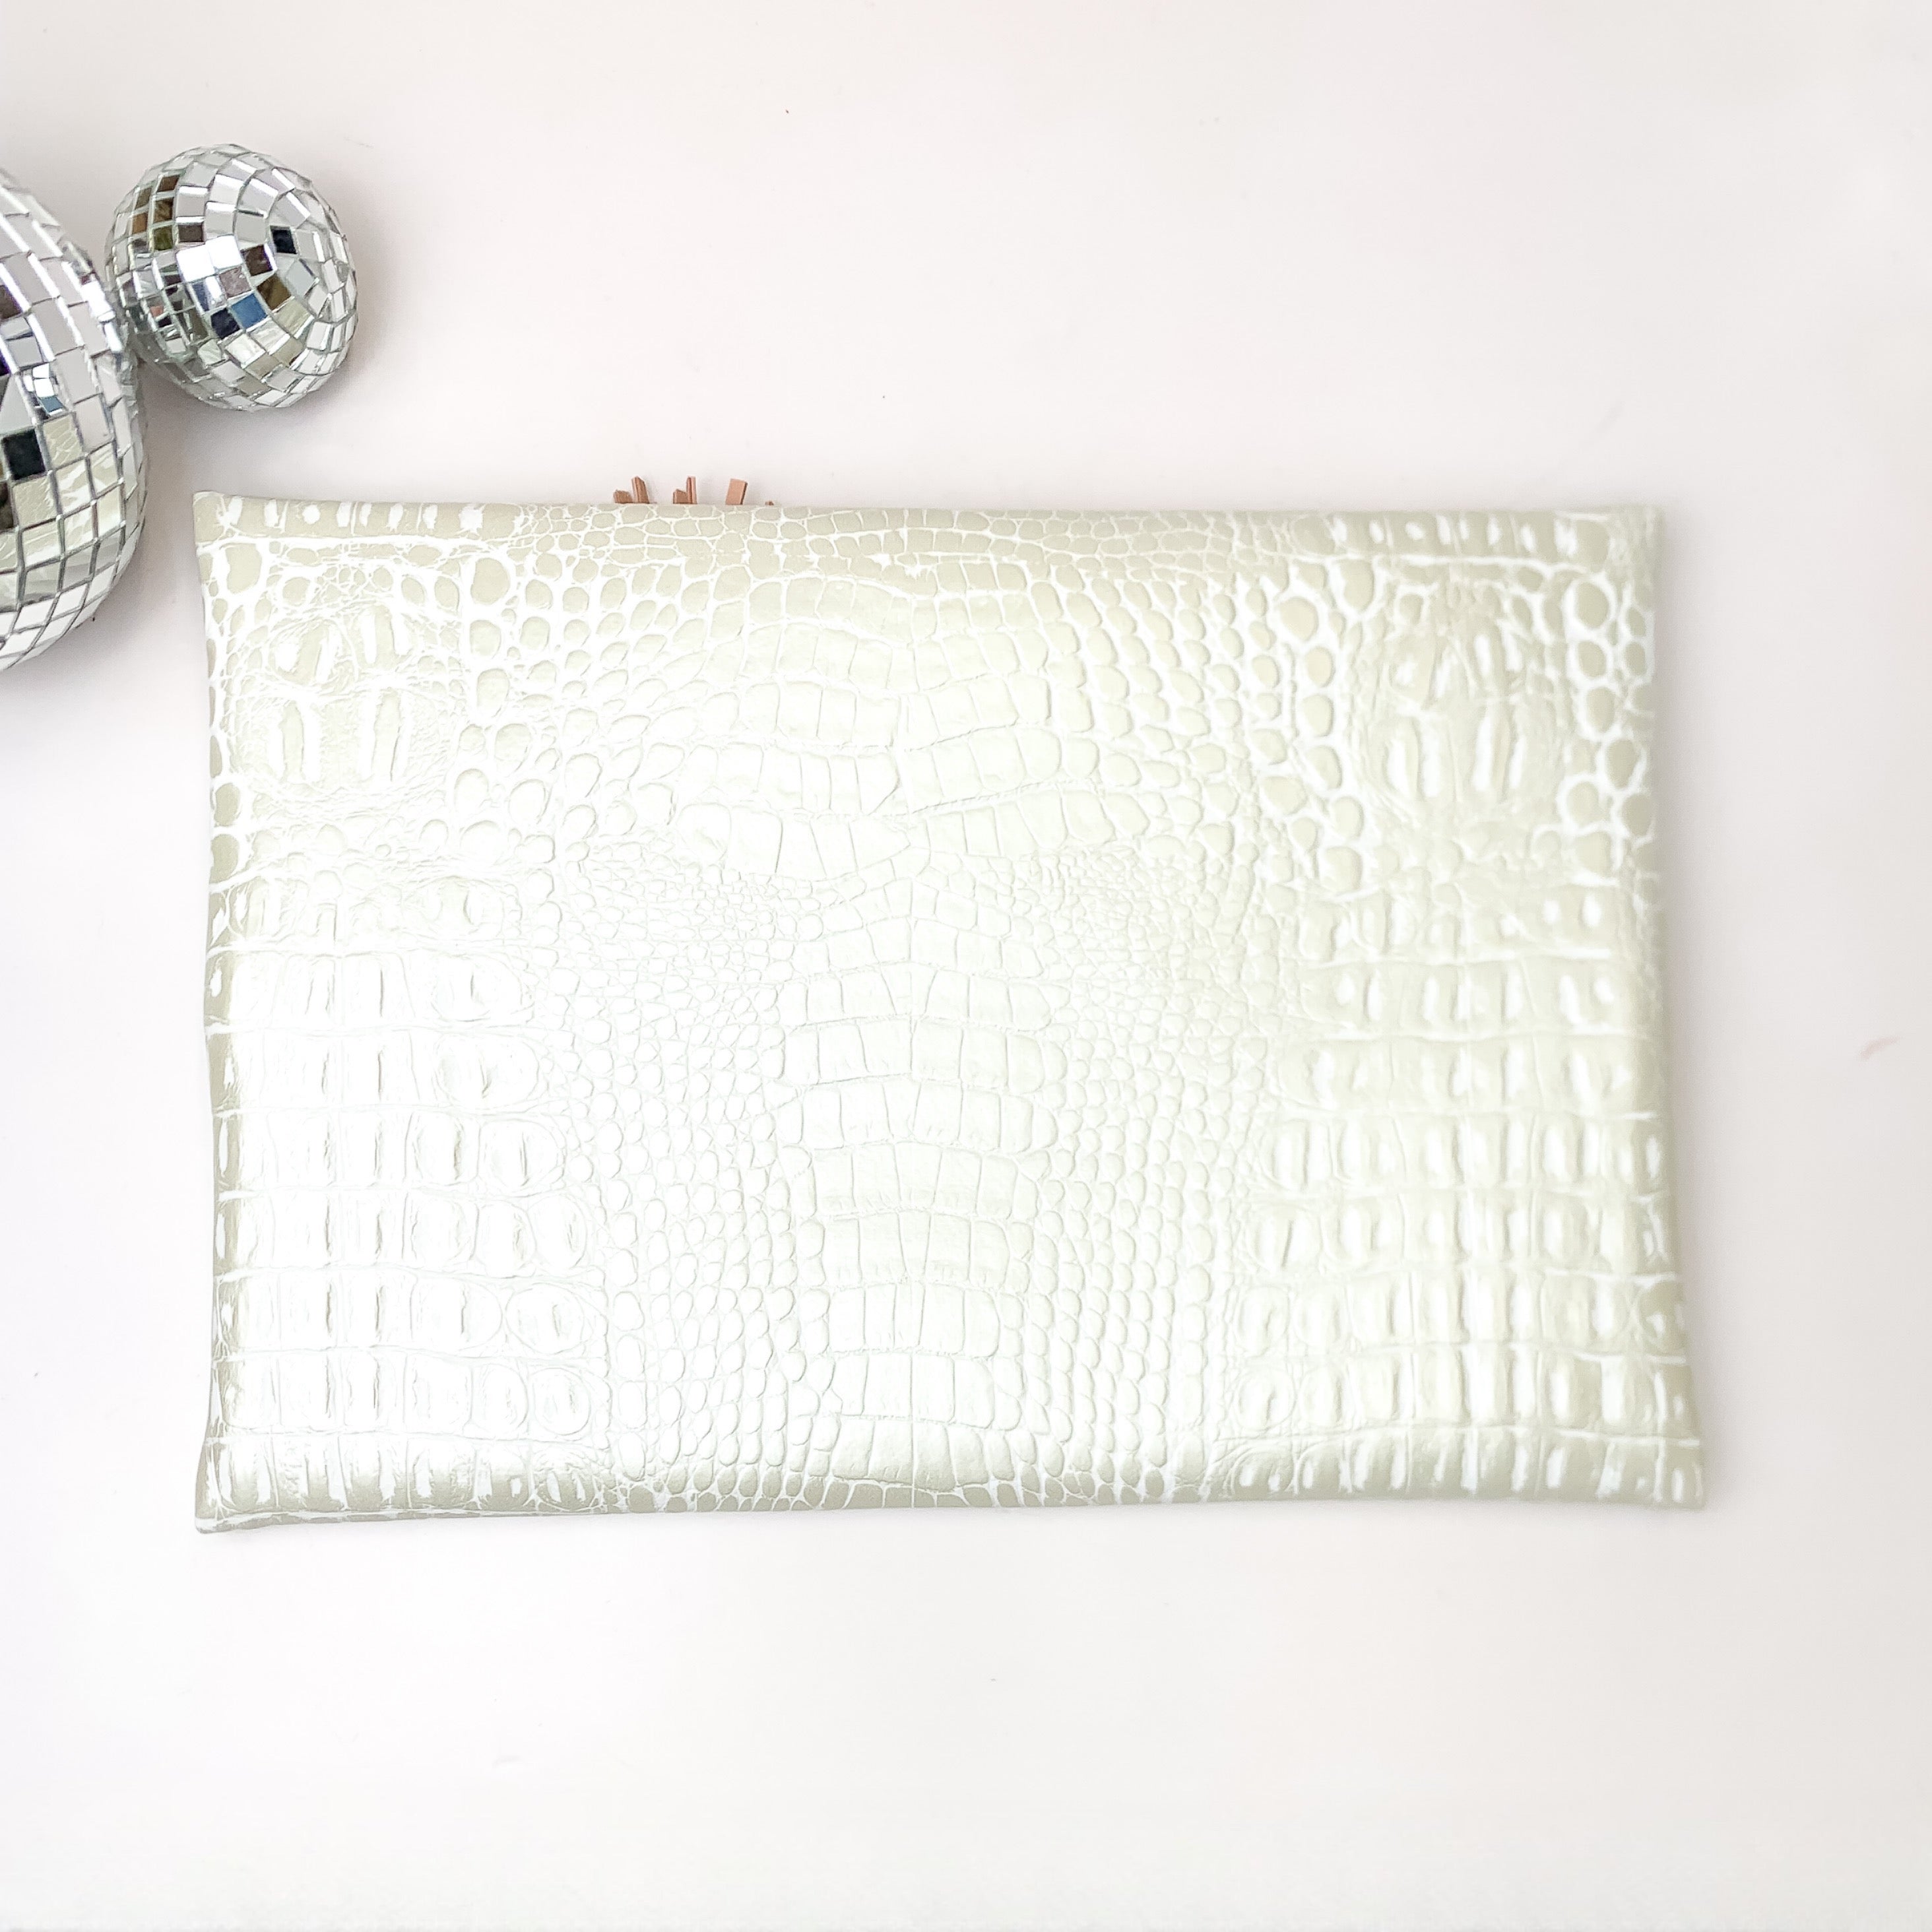 Makeup Junkie | Medium Shade of Pearl Lay Flat Bag in Pearl White Croc Print - Giddy Up Glamour Boutique